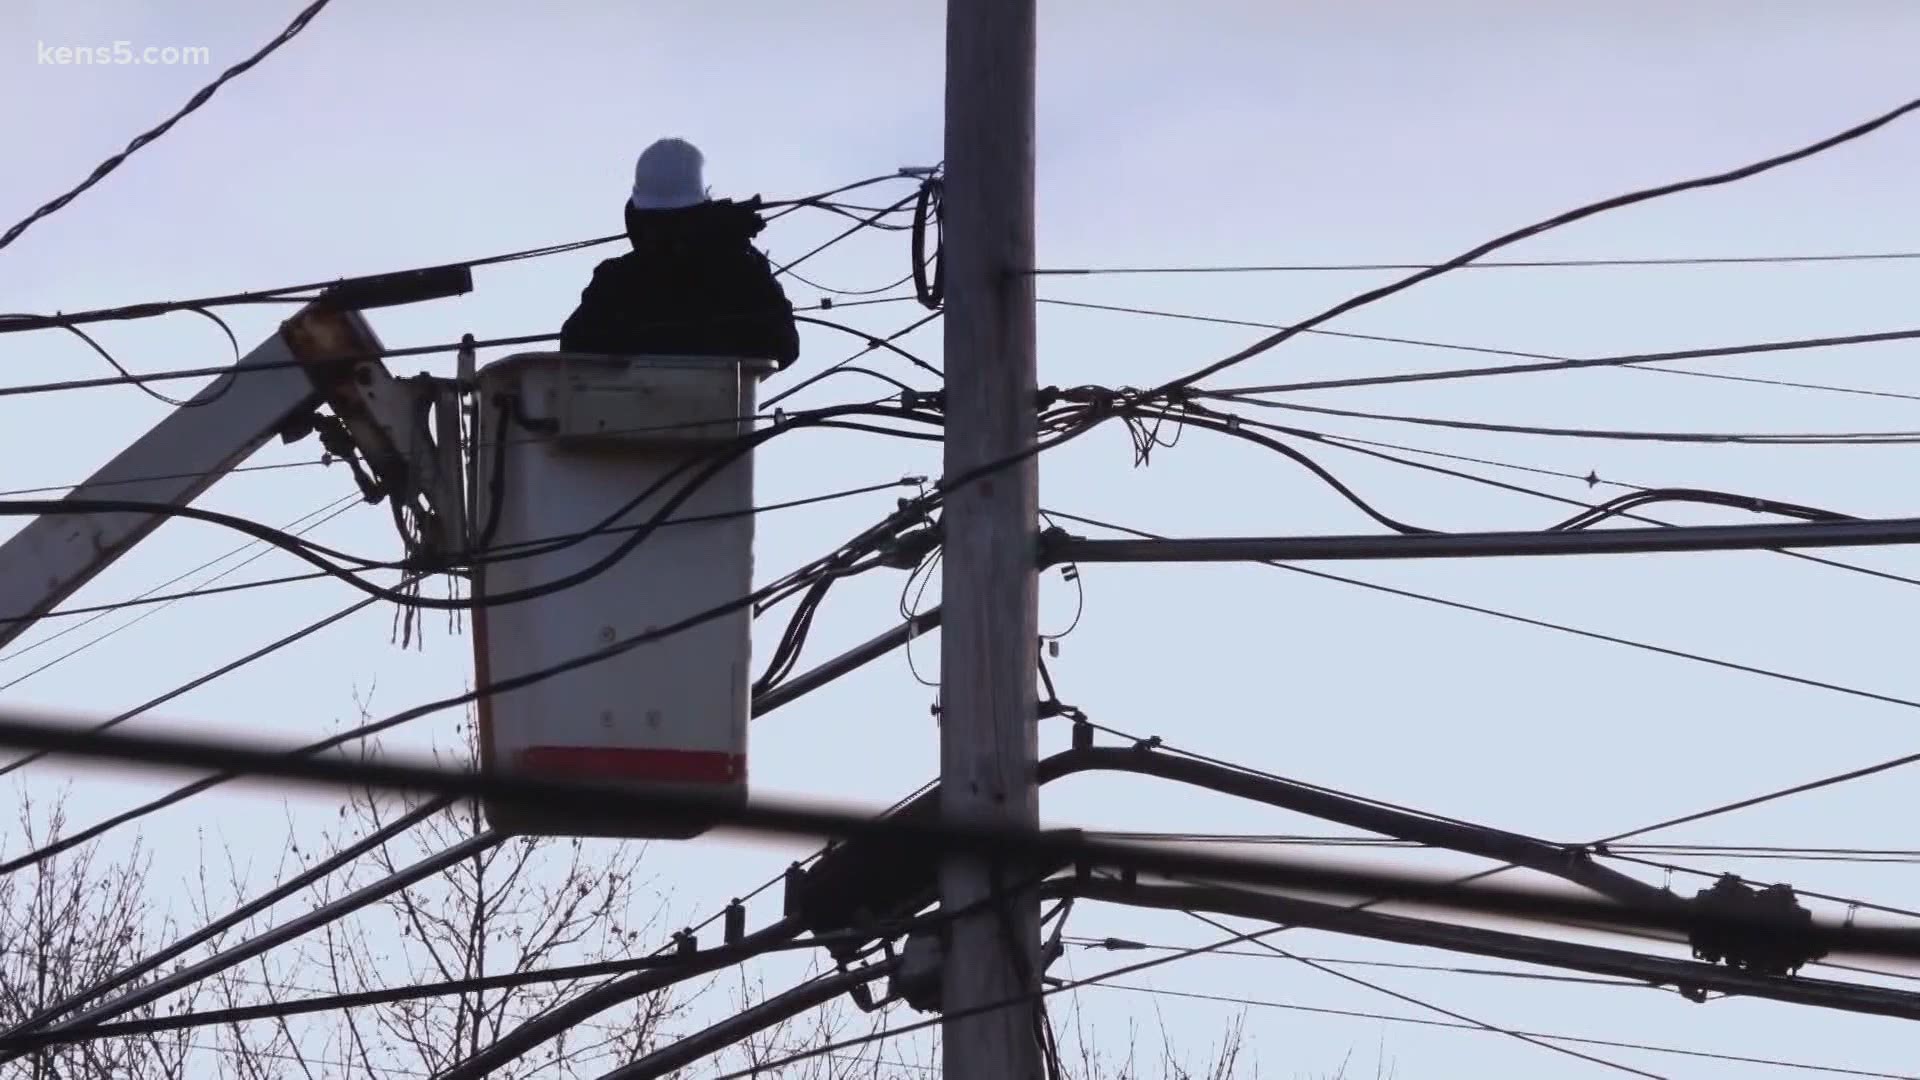 The city-owned utility says it works around the clock to keep itself secure.